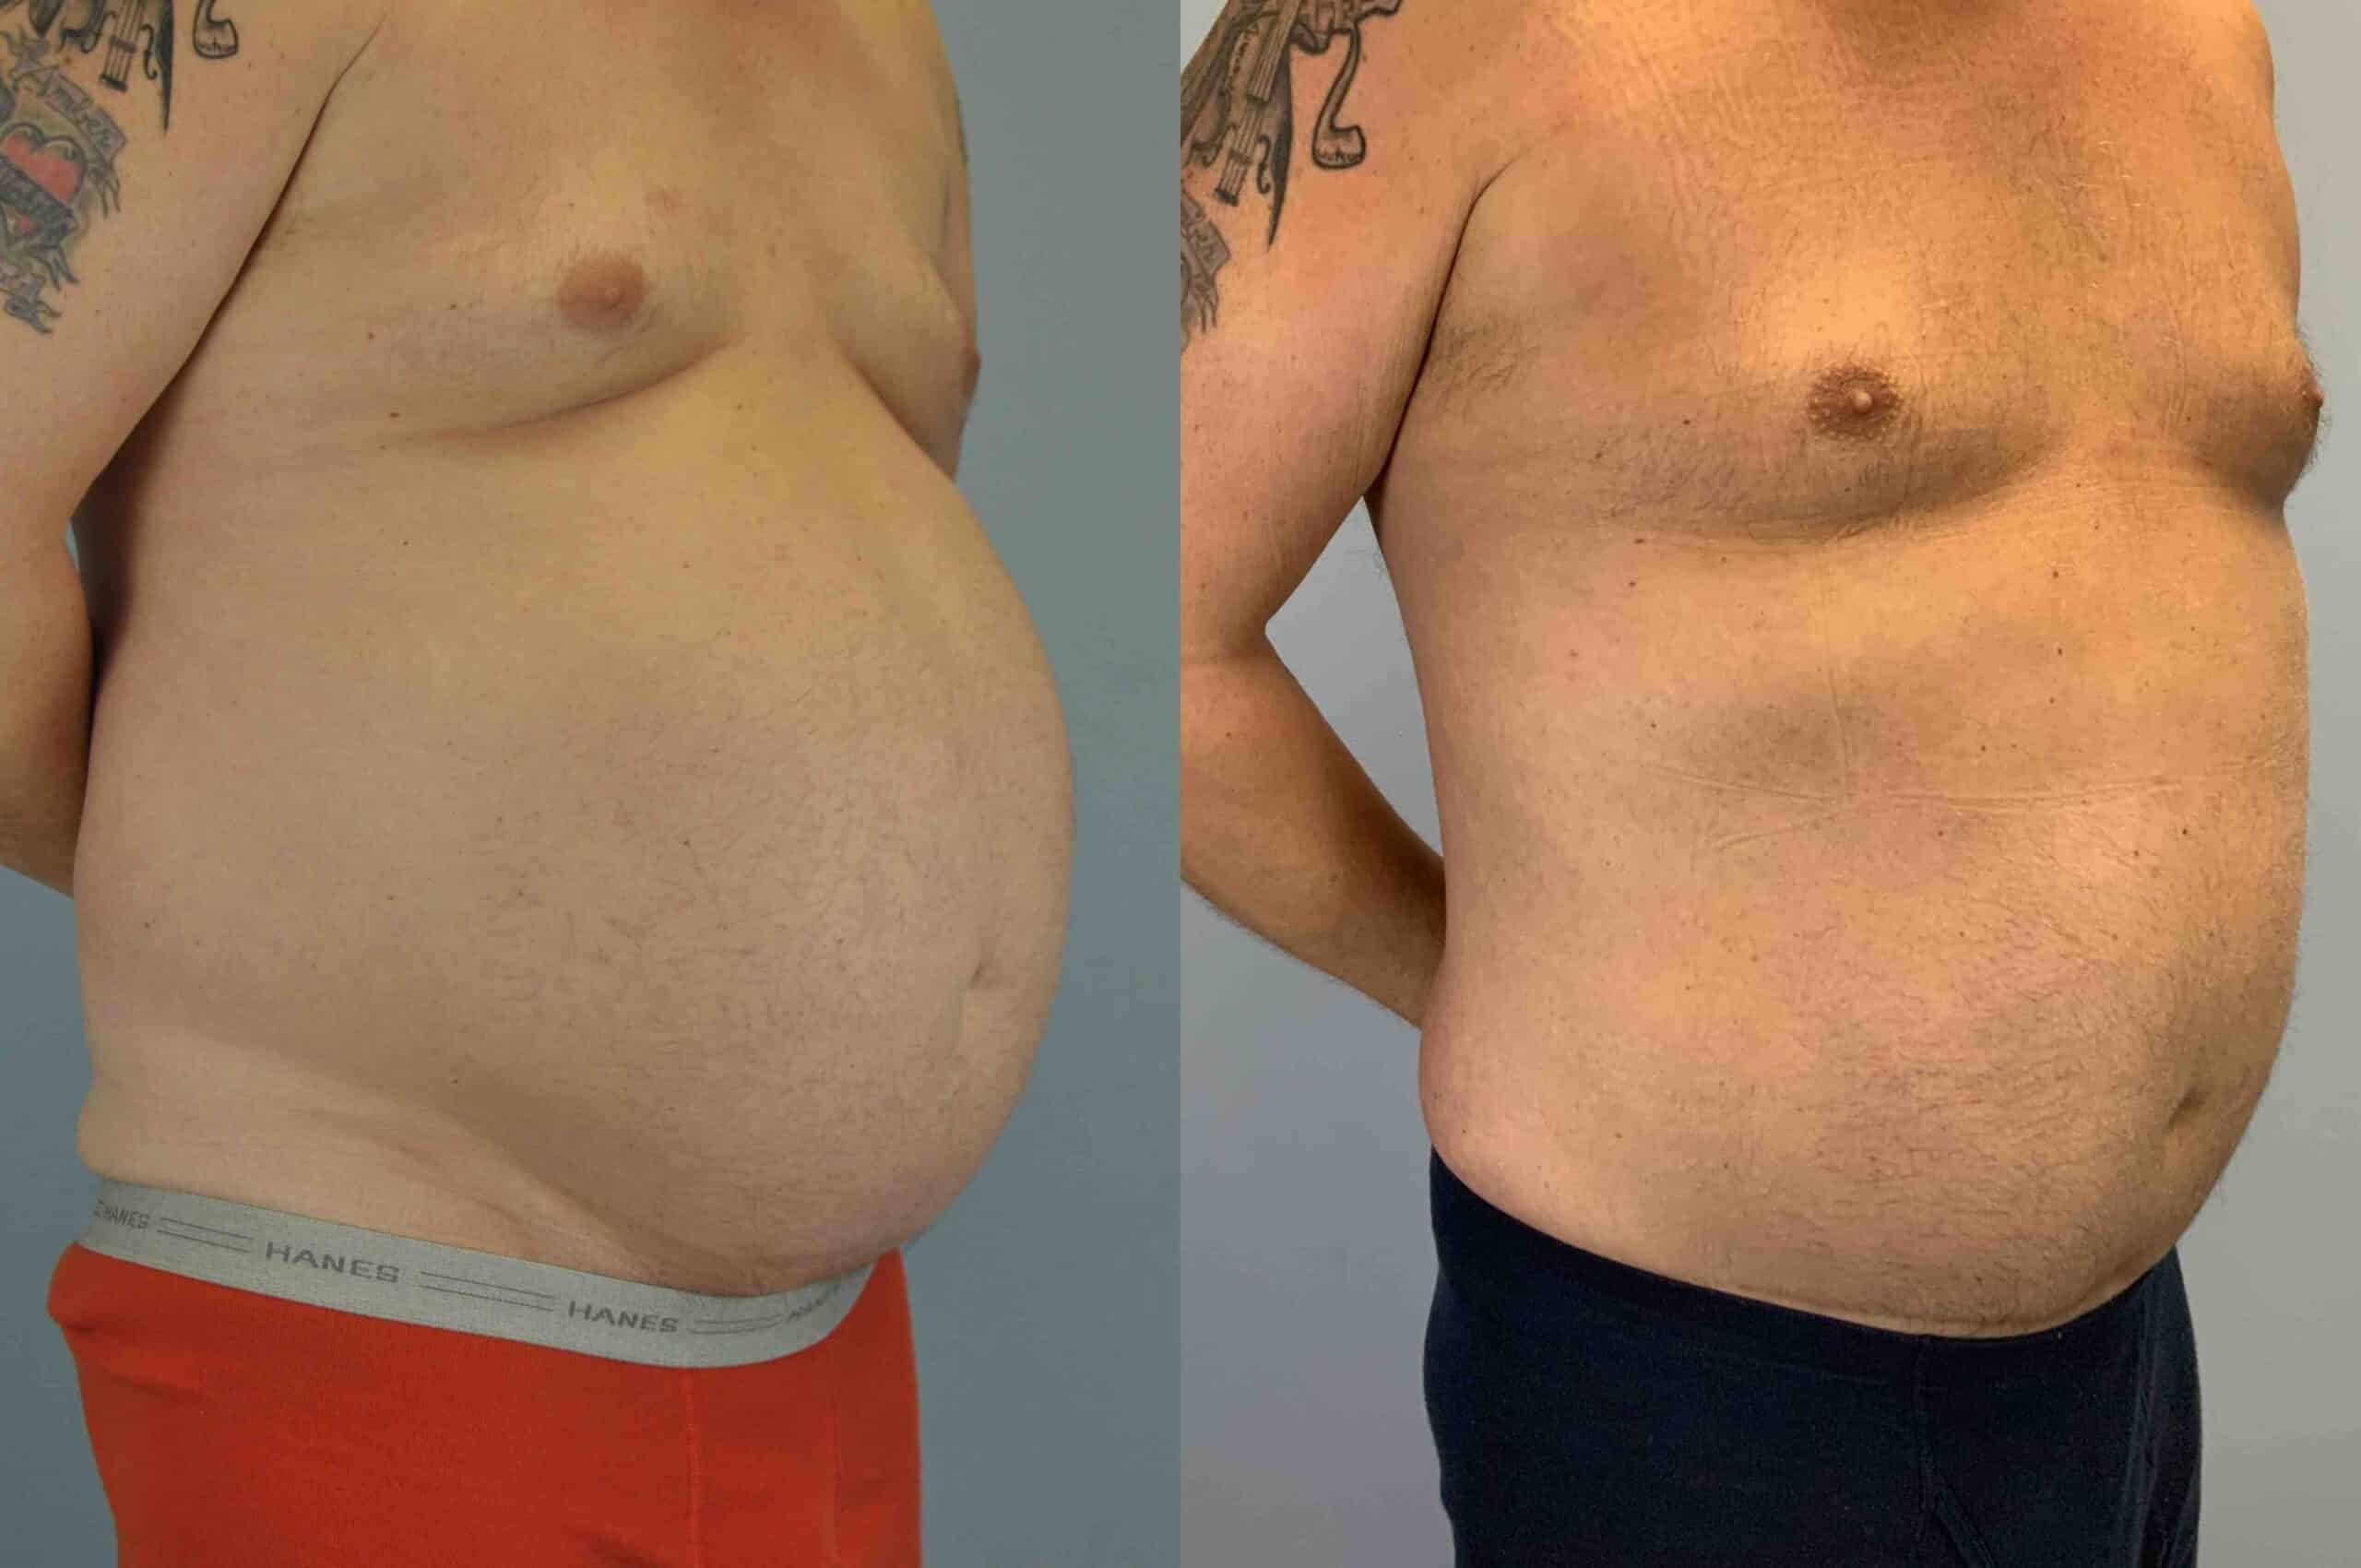 Before and after, patient 2 yrs post op from VASER Abdomen, and Flanks, Tummy Tuck procedures performed by Dr. Paul Vanek